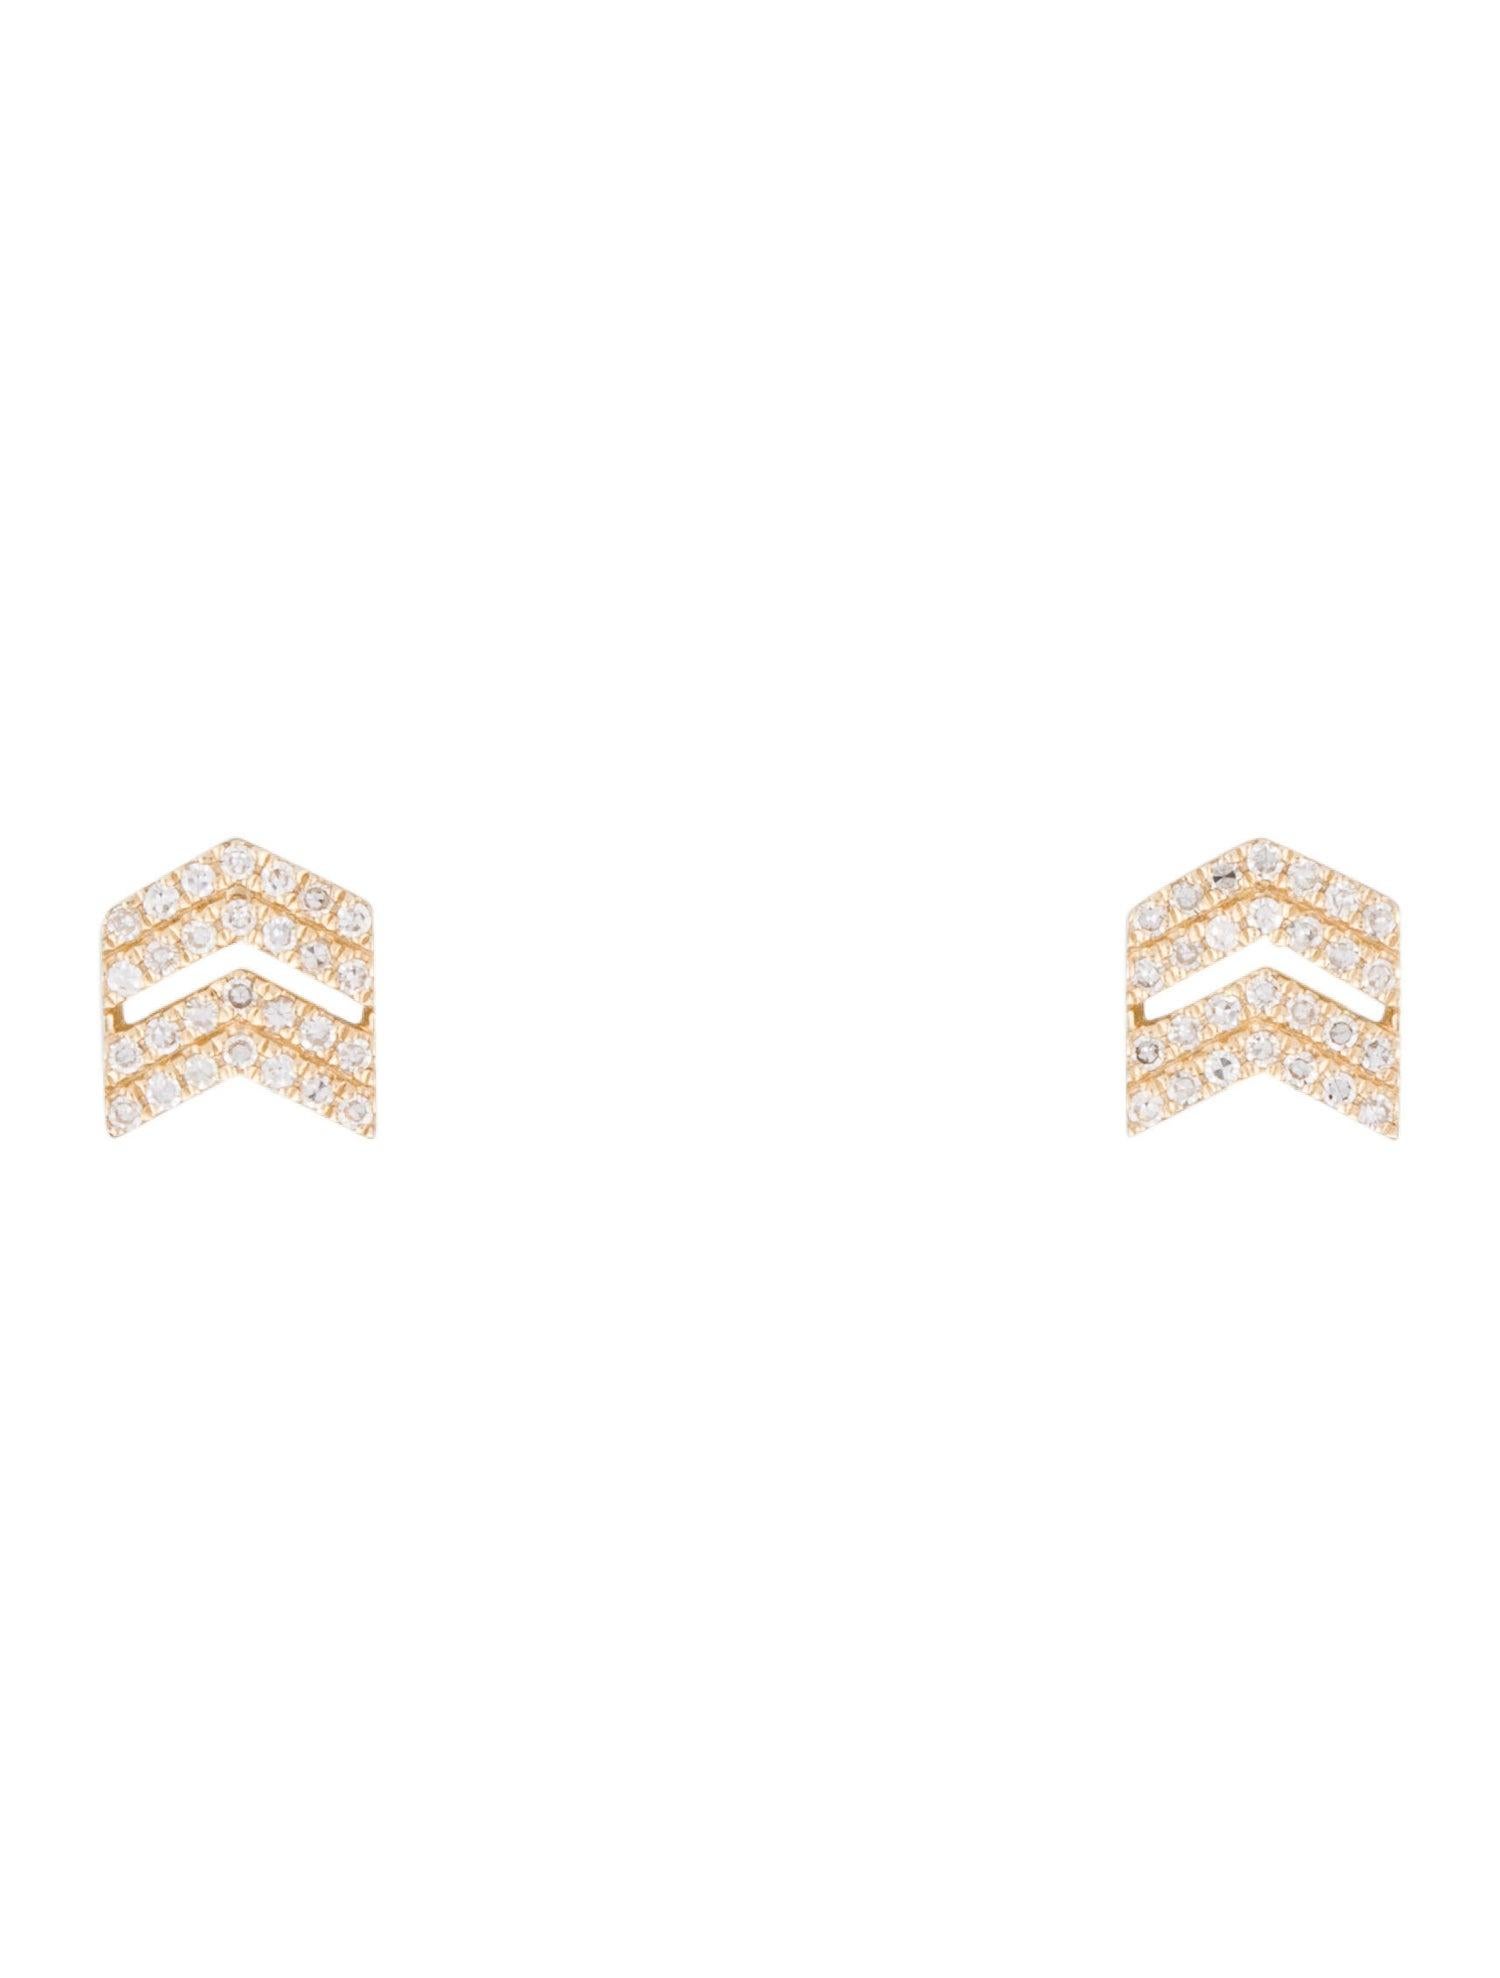 Contemporary 14K Yellow Gold Diamond Double Arrow Stud Earrings for Her For Sale